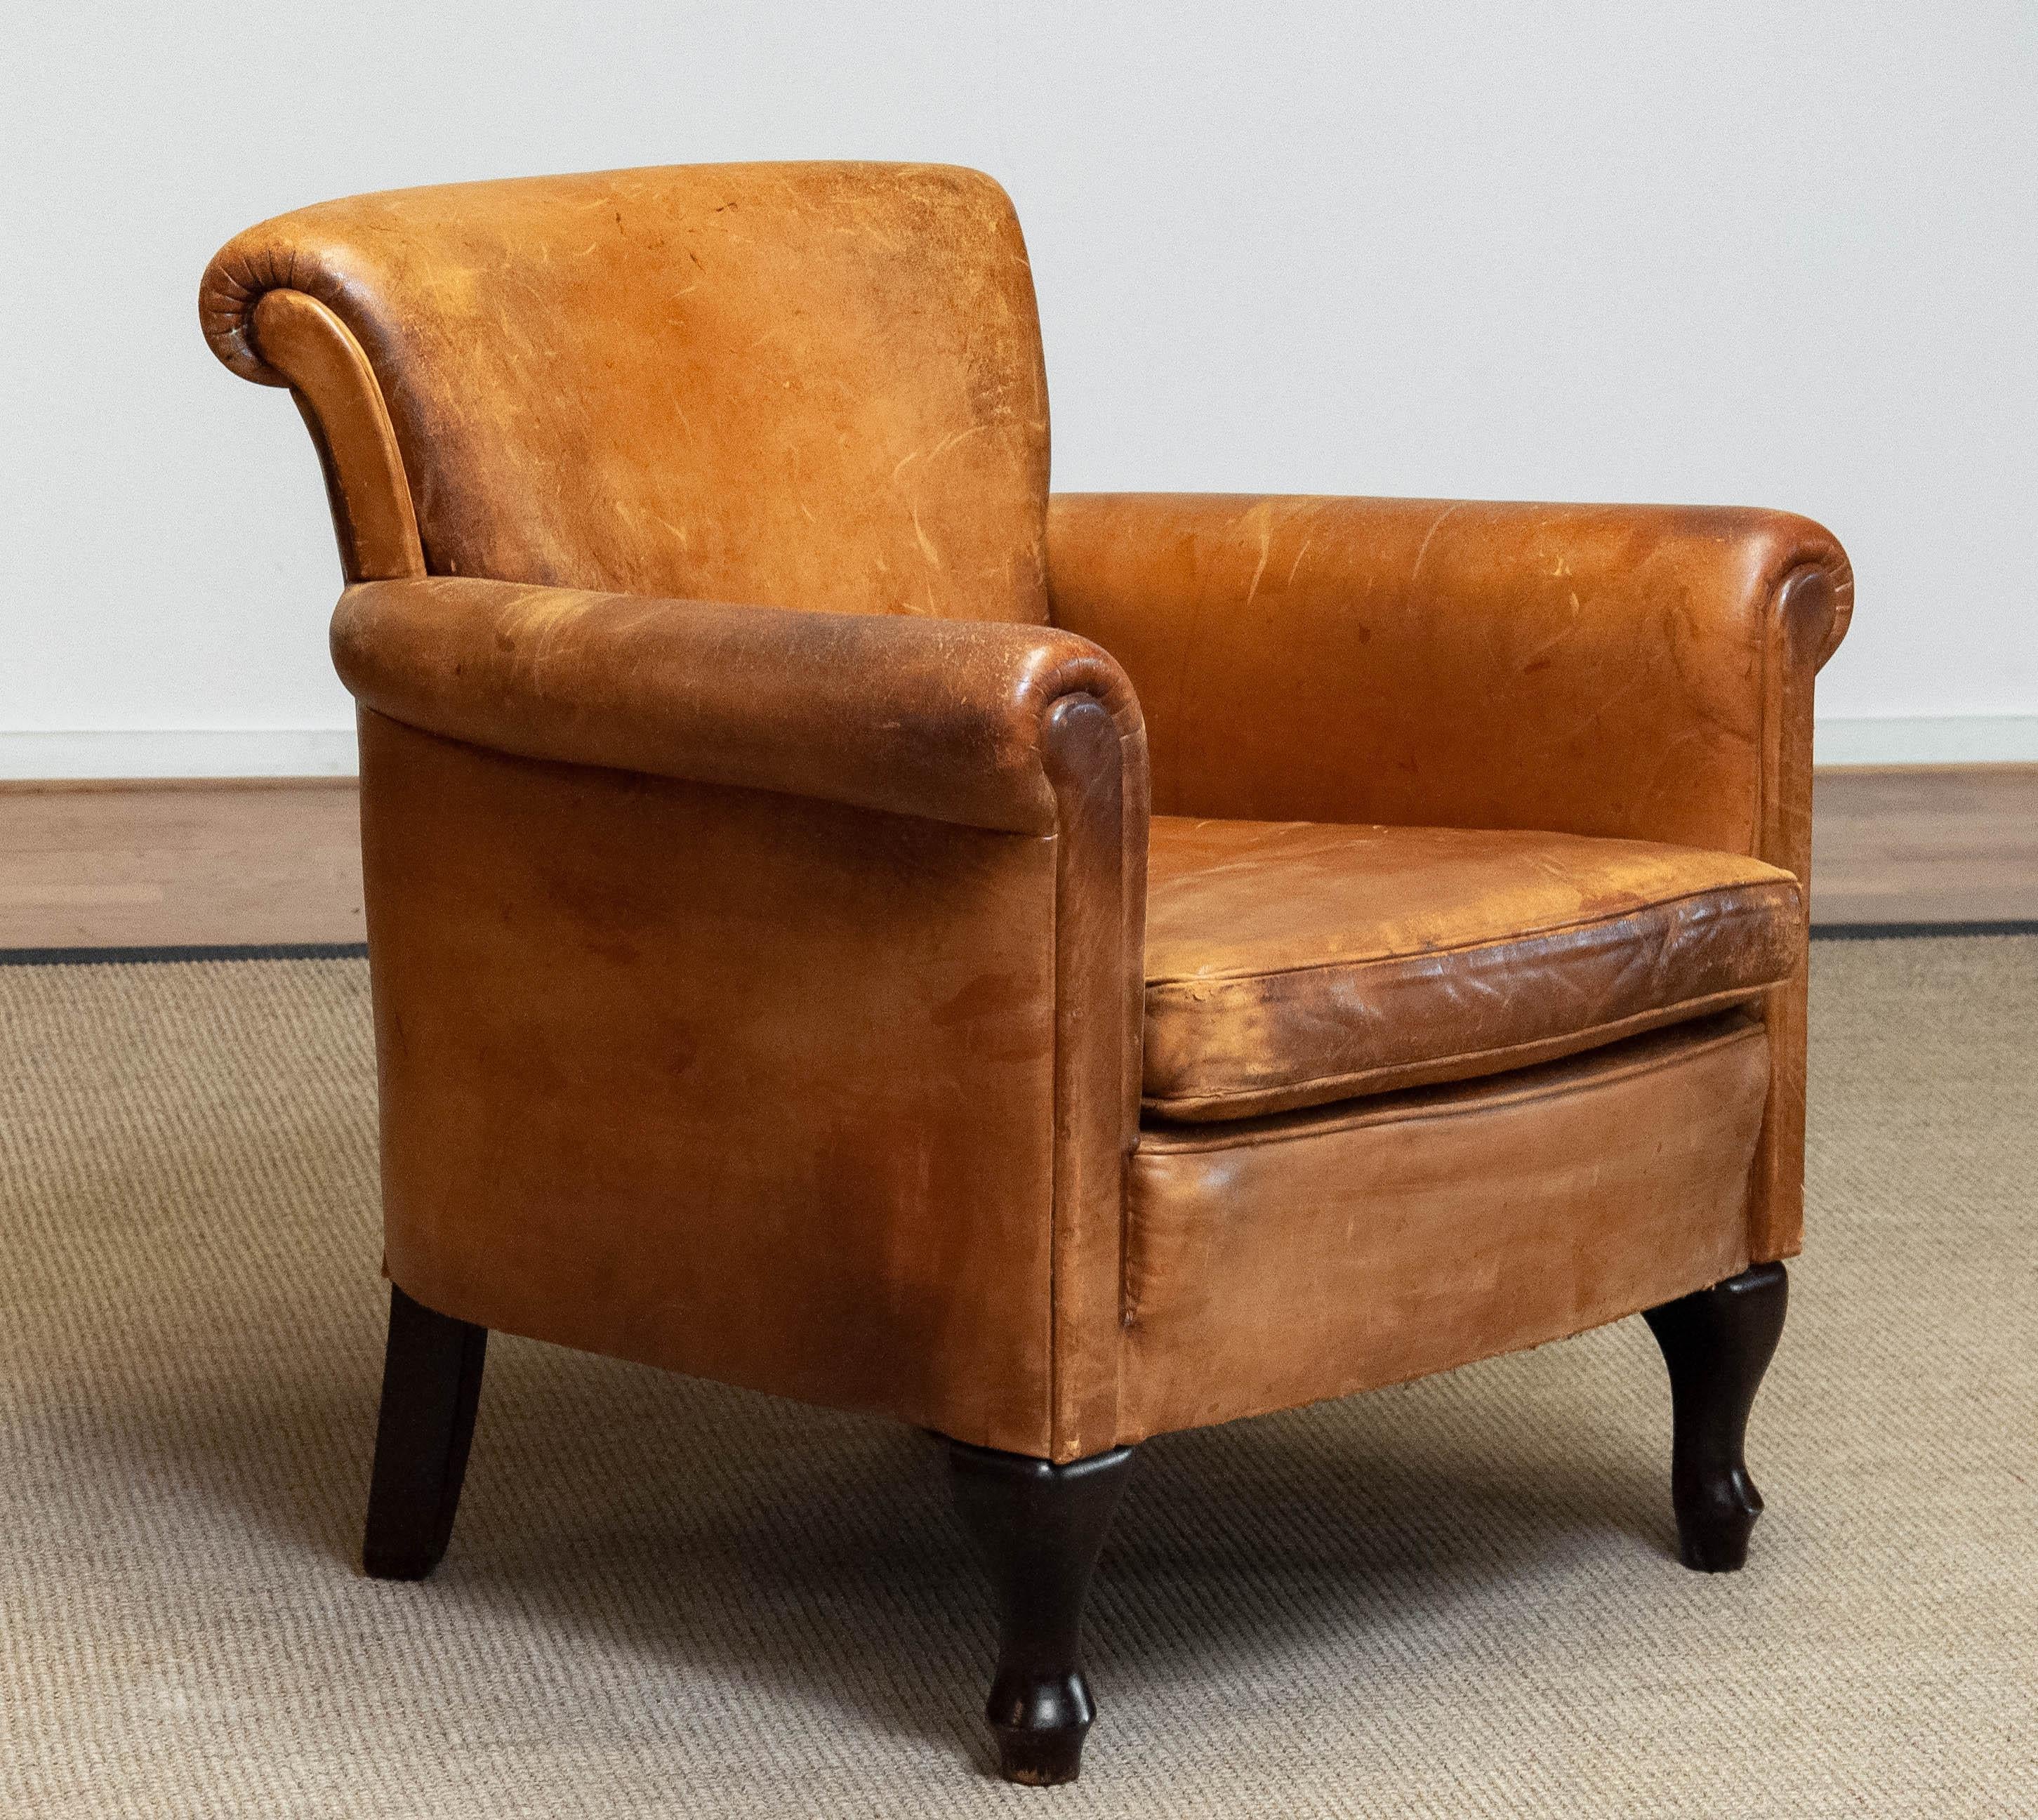 Beautiful French Art Deco sheep leather club / lounge chair. Rolled arms and back with loose seat cushion all upholstered with the original, soft, sheep leather. The aged patina and character of these classic club / lounge chairs shows pure luxury